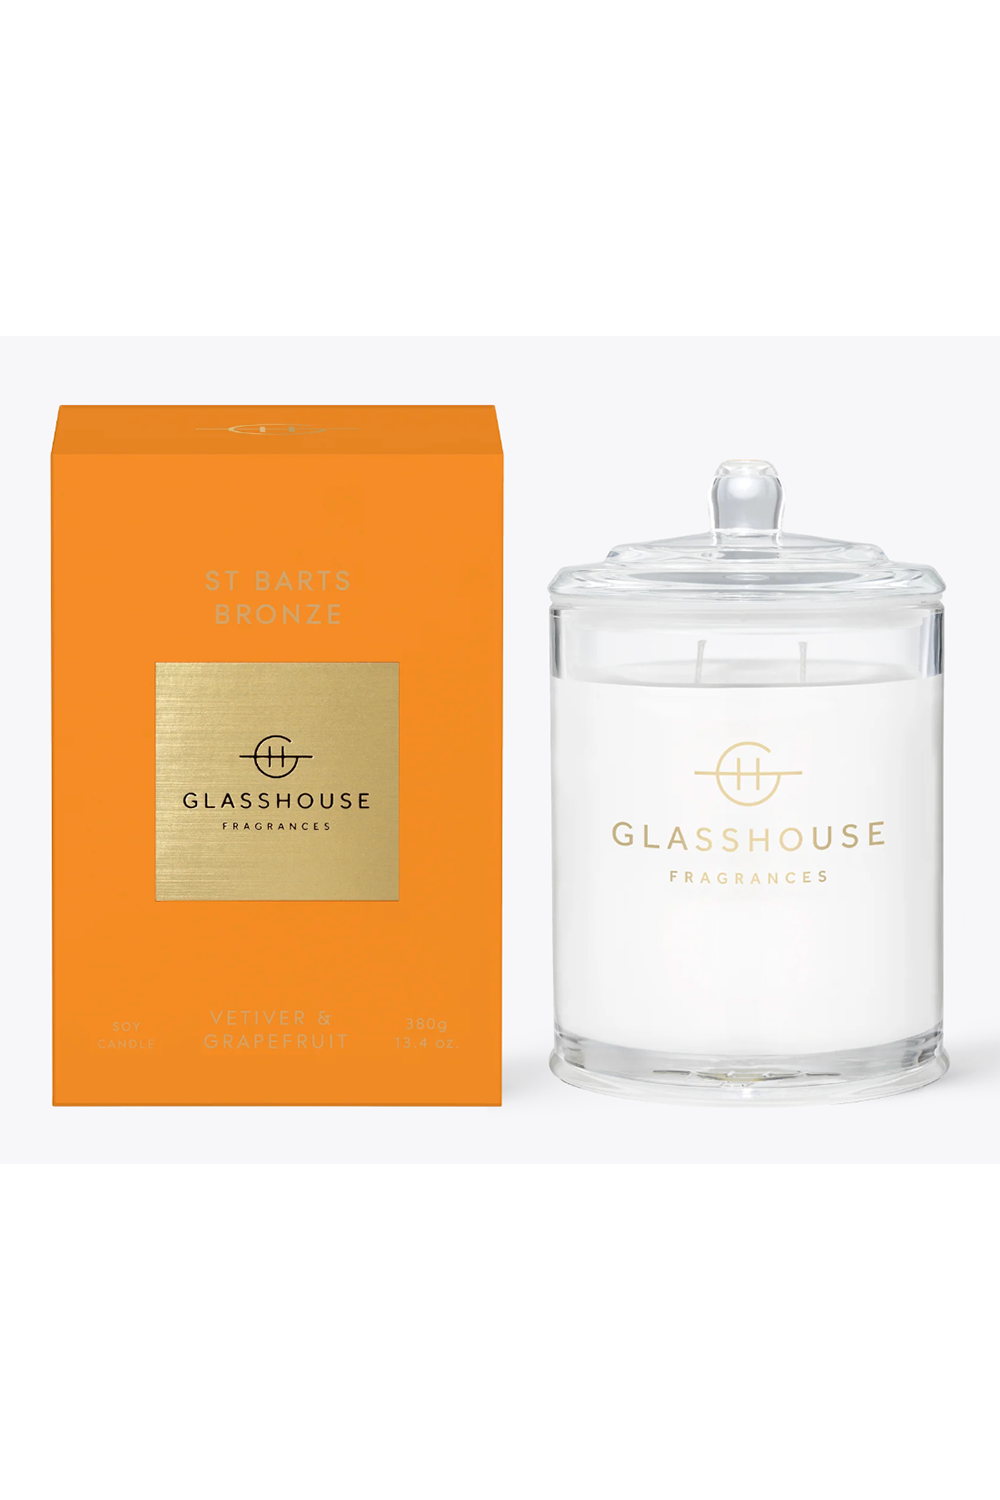 Glasshouse Fragrance Candle - Seduced by St. Barts